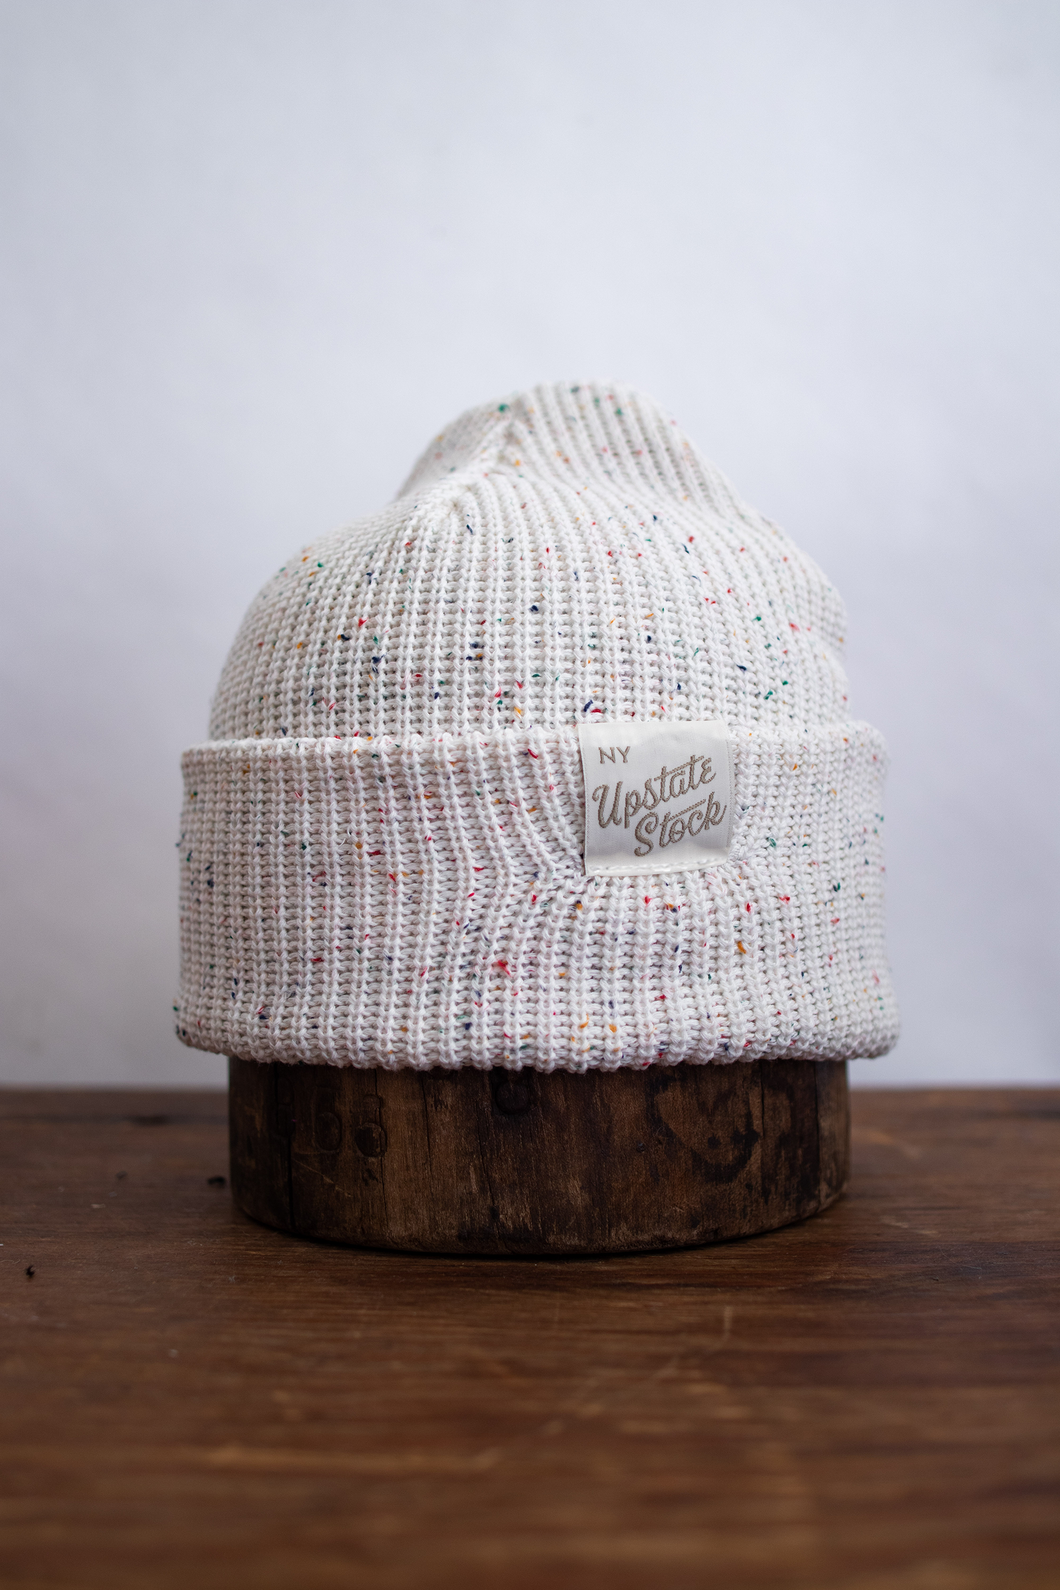 Upstate Stock - Confetti Super Fine Upcycled Cotton Watchcap